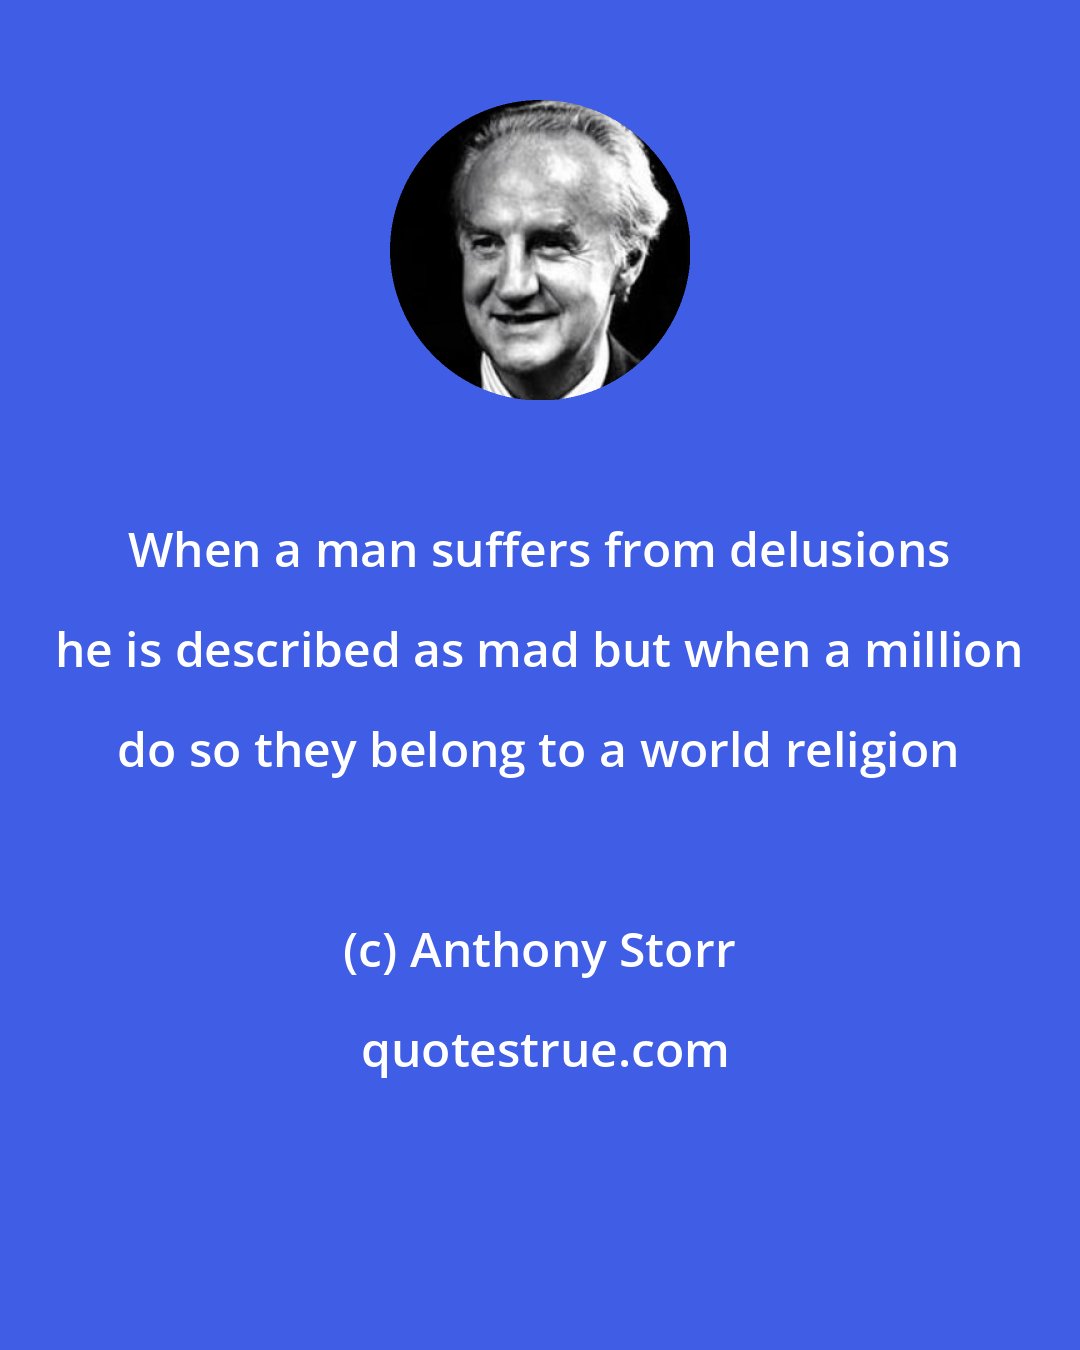 Anthony Storr: When a man suffers from delusions he is described as mad but when a million do so they belong to a world religion